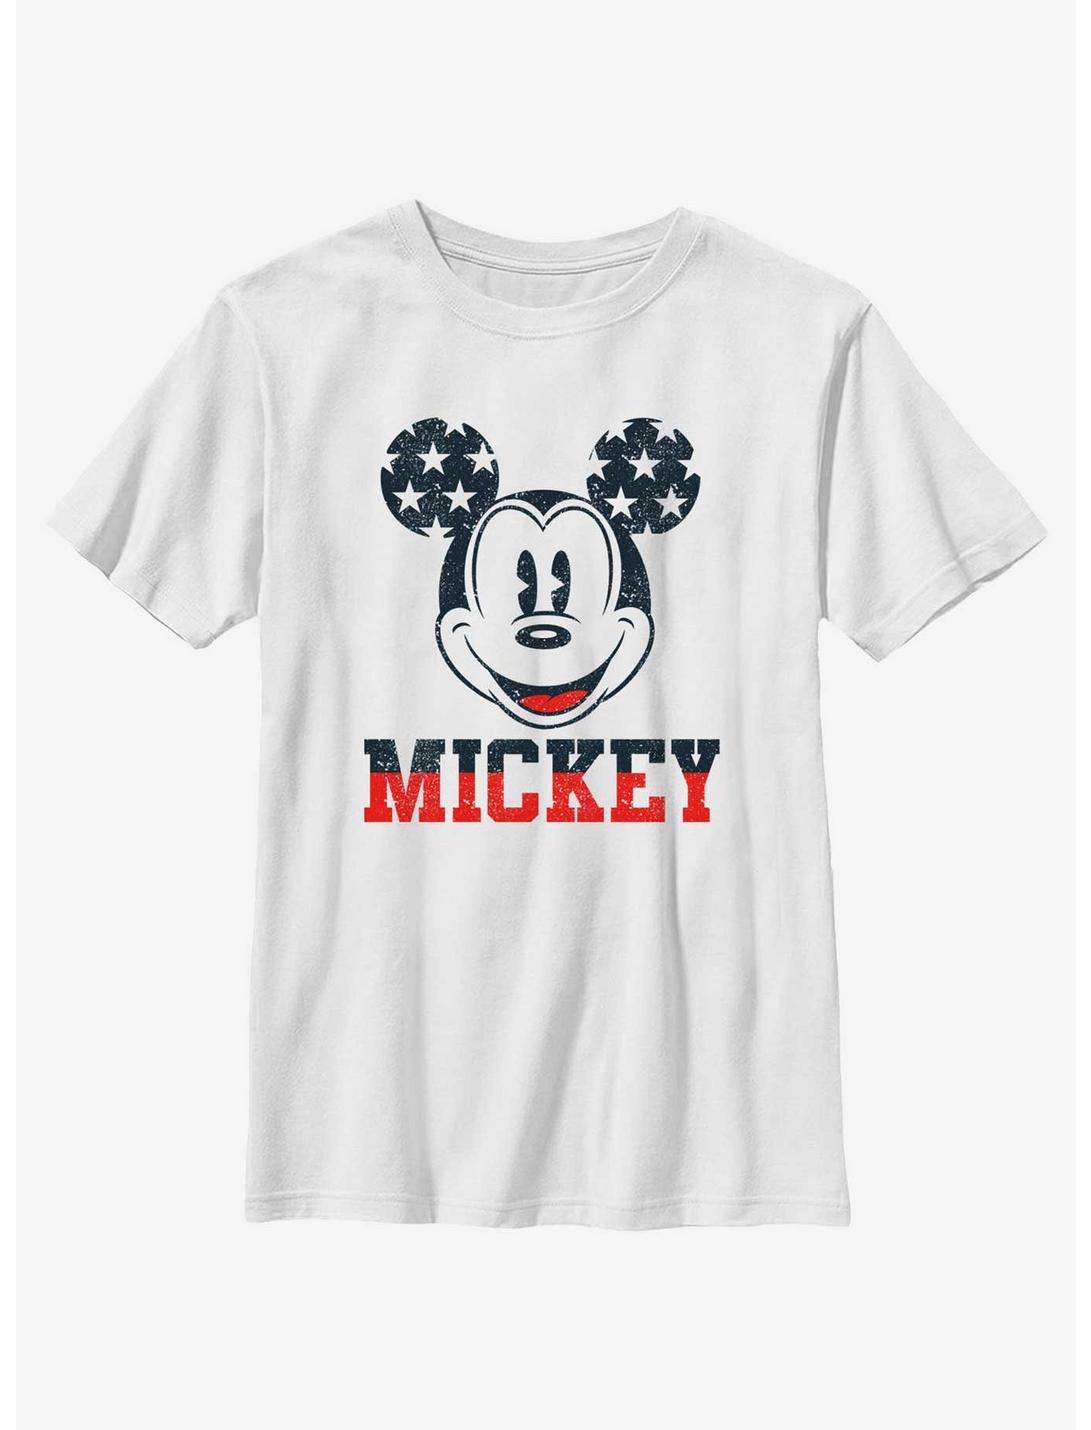 Disney Mickey Mouse Mickey Star Ears Youth T-Shirt, WHITE, hi-res